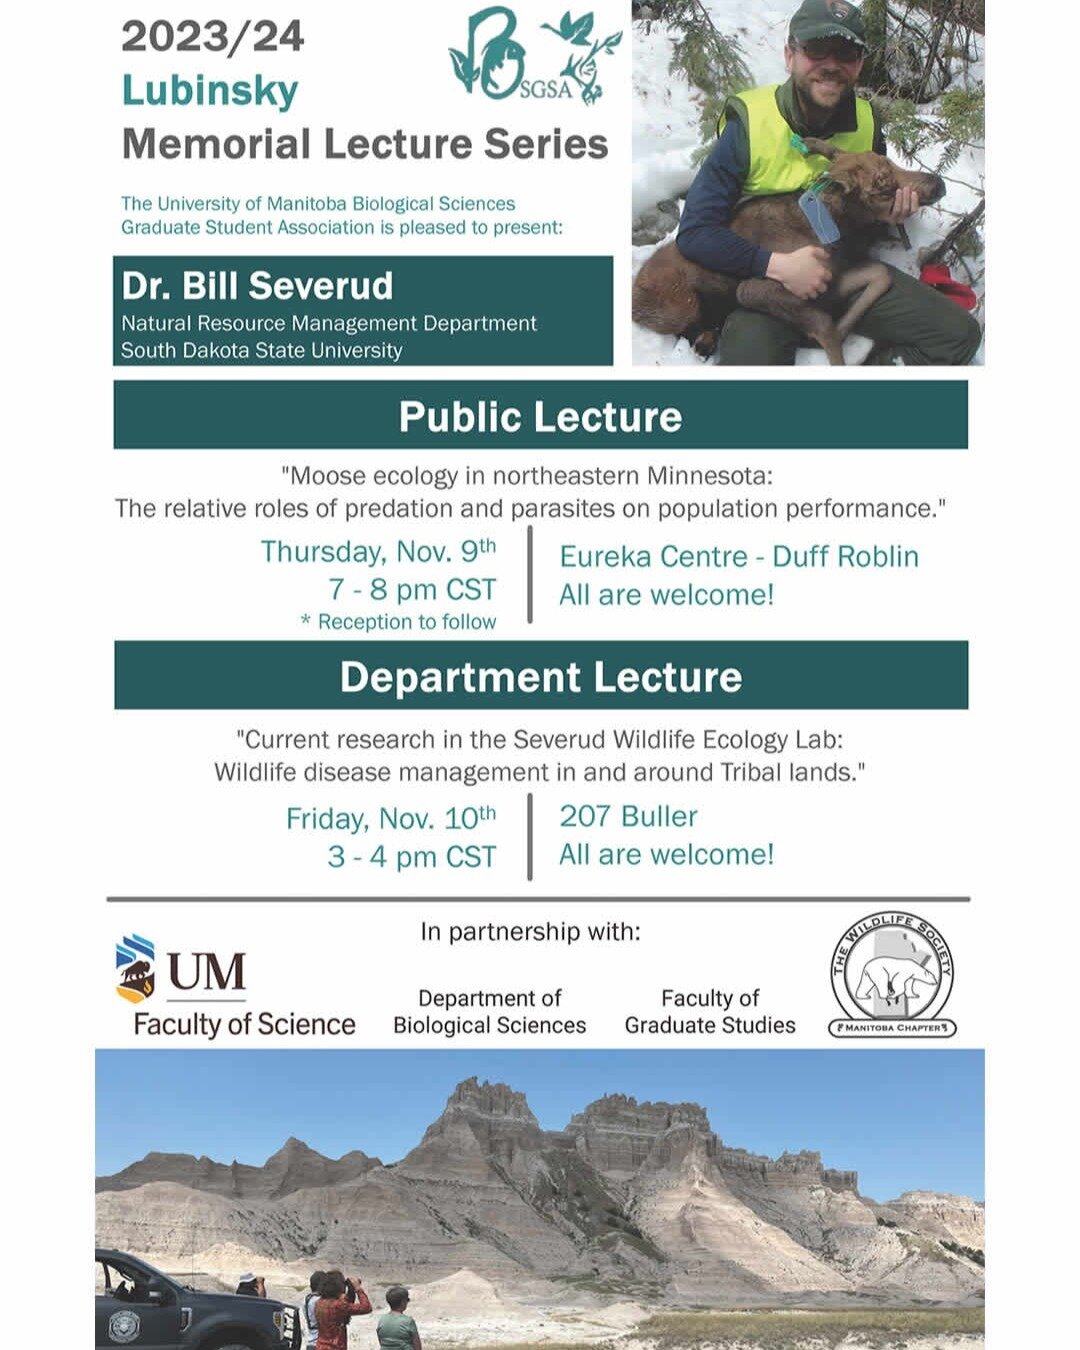 #ThinkLearnDo
TOMORROW!
Lubinsky Memorial Public Lecture with Dr Bill Severud from South Dakota State University.
Duff Roblin Building, U of Manitoba
7 to 8pm with a reception to follow.